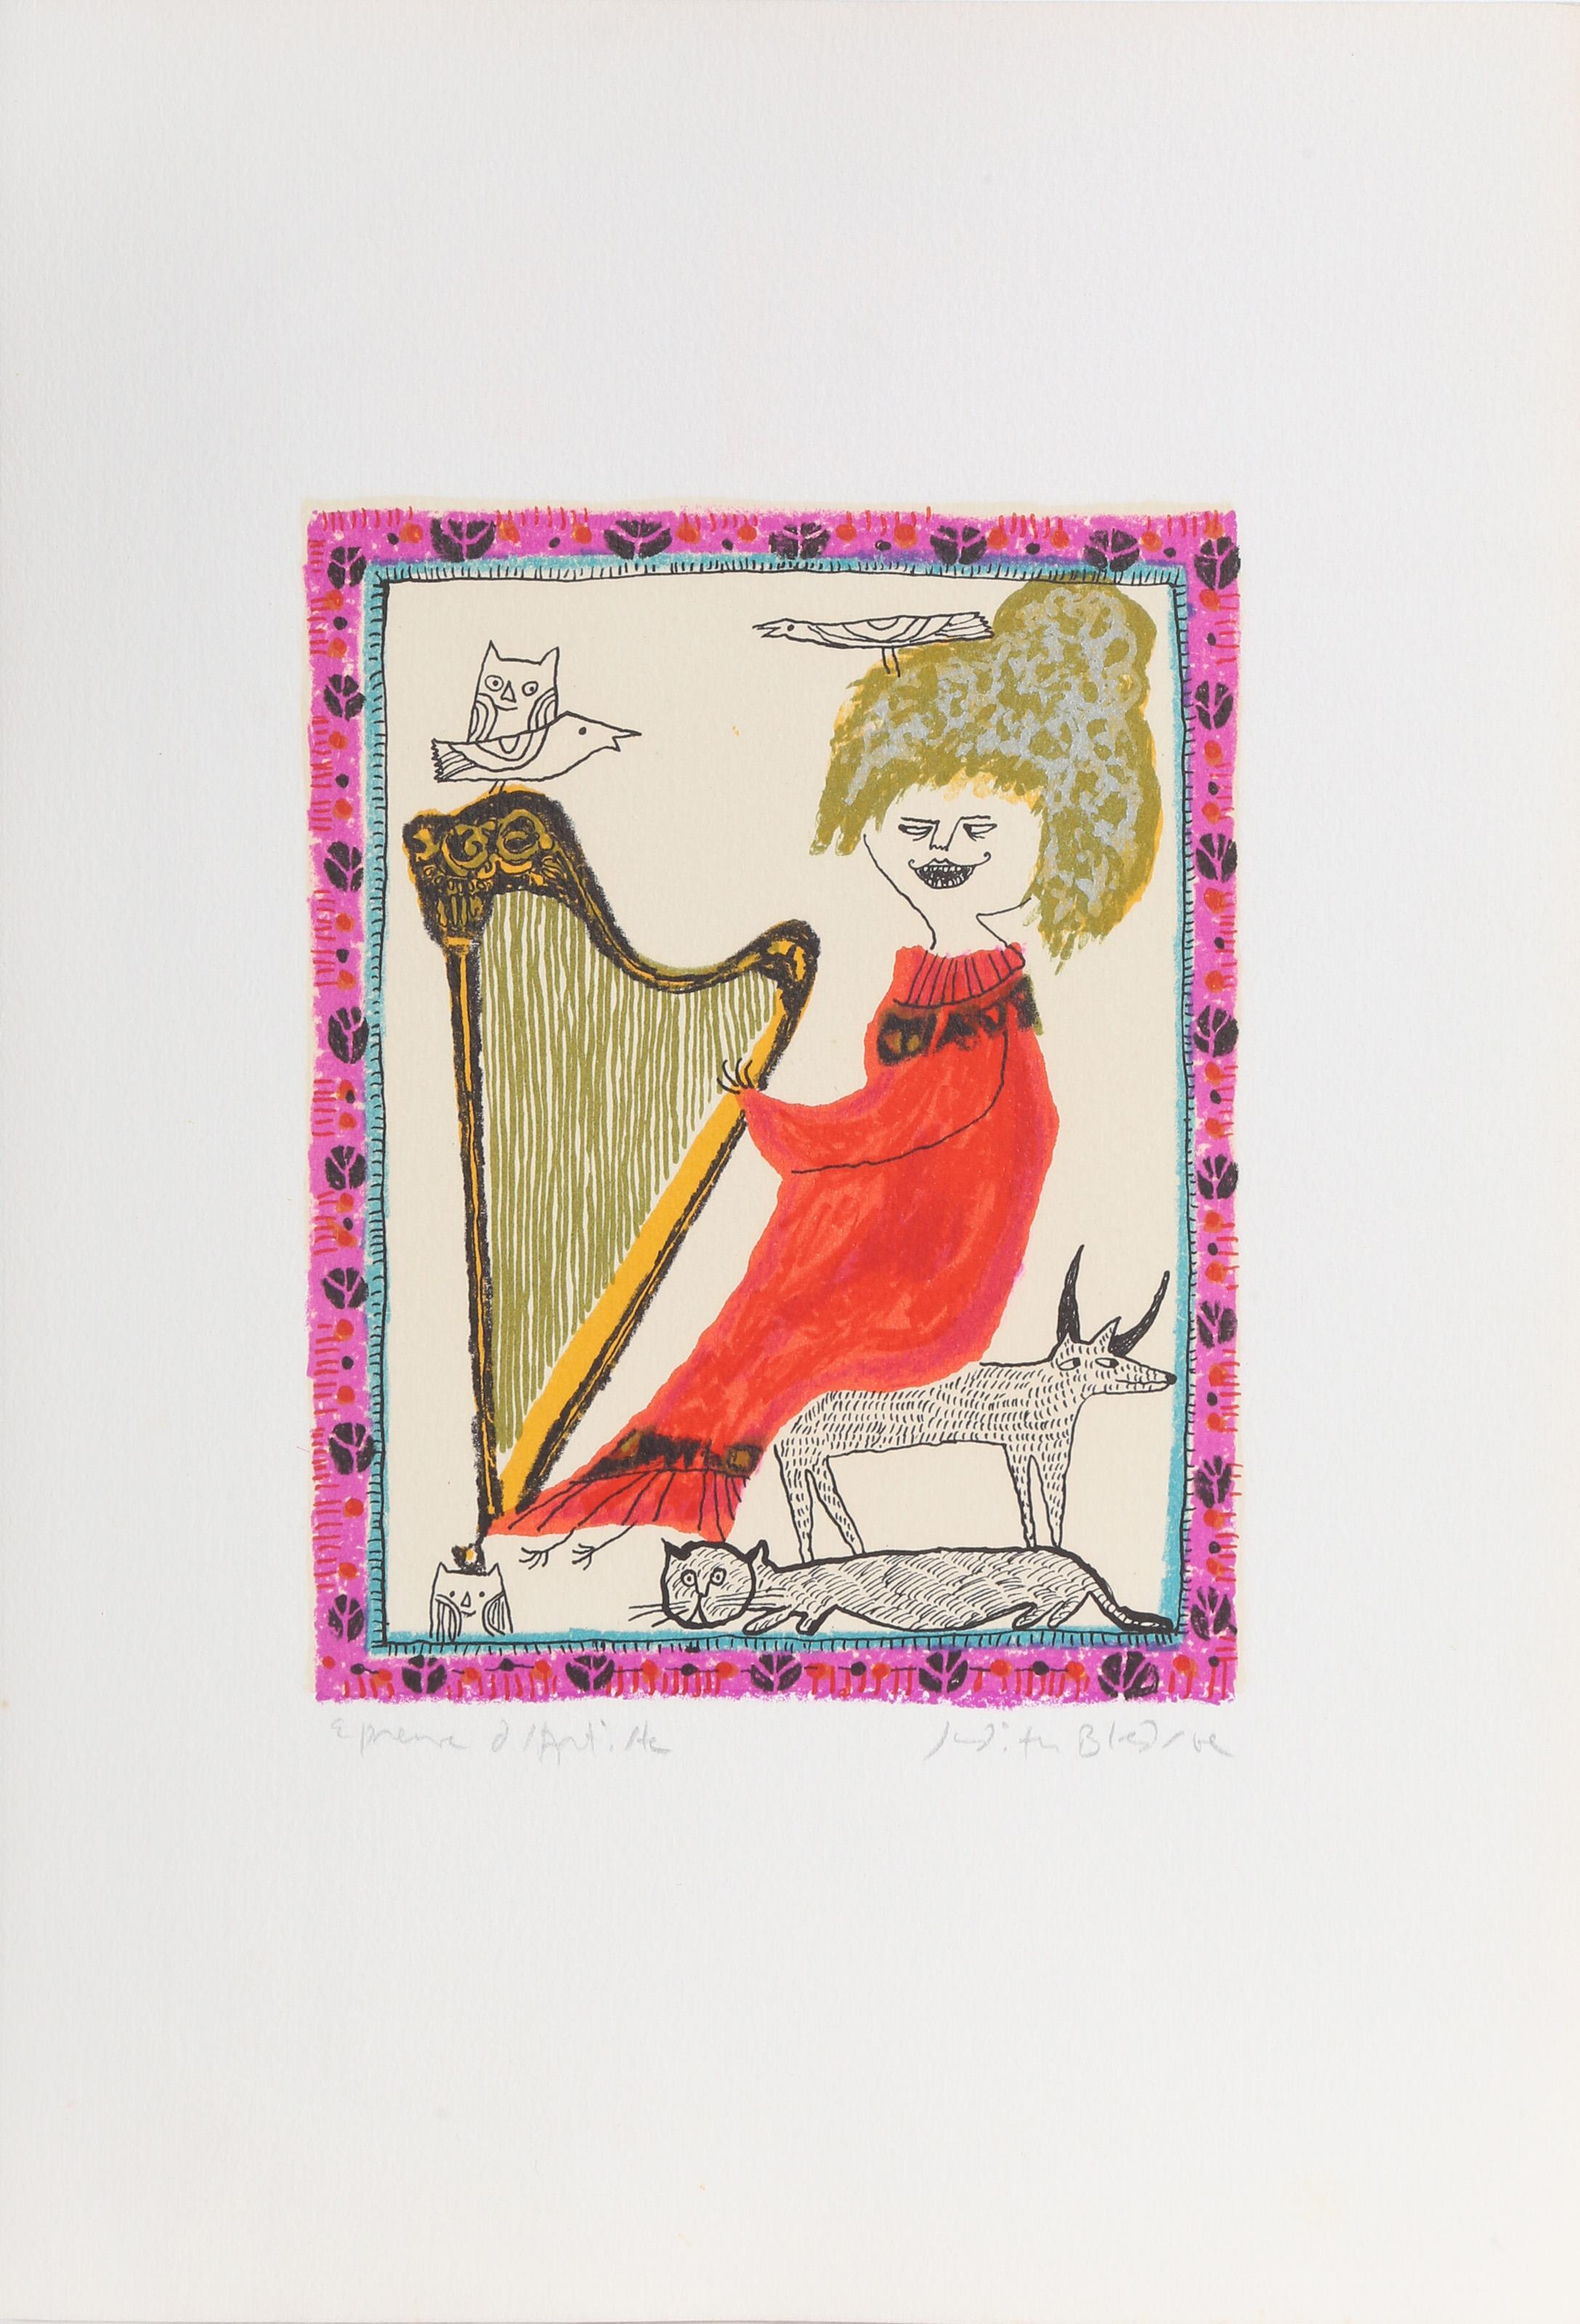 Judith Bledsoe, American (1938 - 2013) -  Petite Portrait - Harpist. Year: circa 1974, Medium: Lithograph, signed and numbered in pencil, Edition: EA, Image Size: 8 x 6 inches, Size: 15  x 10.5 in. (38.1  x 26.67 cm), Description: Judith Bledsoe's